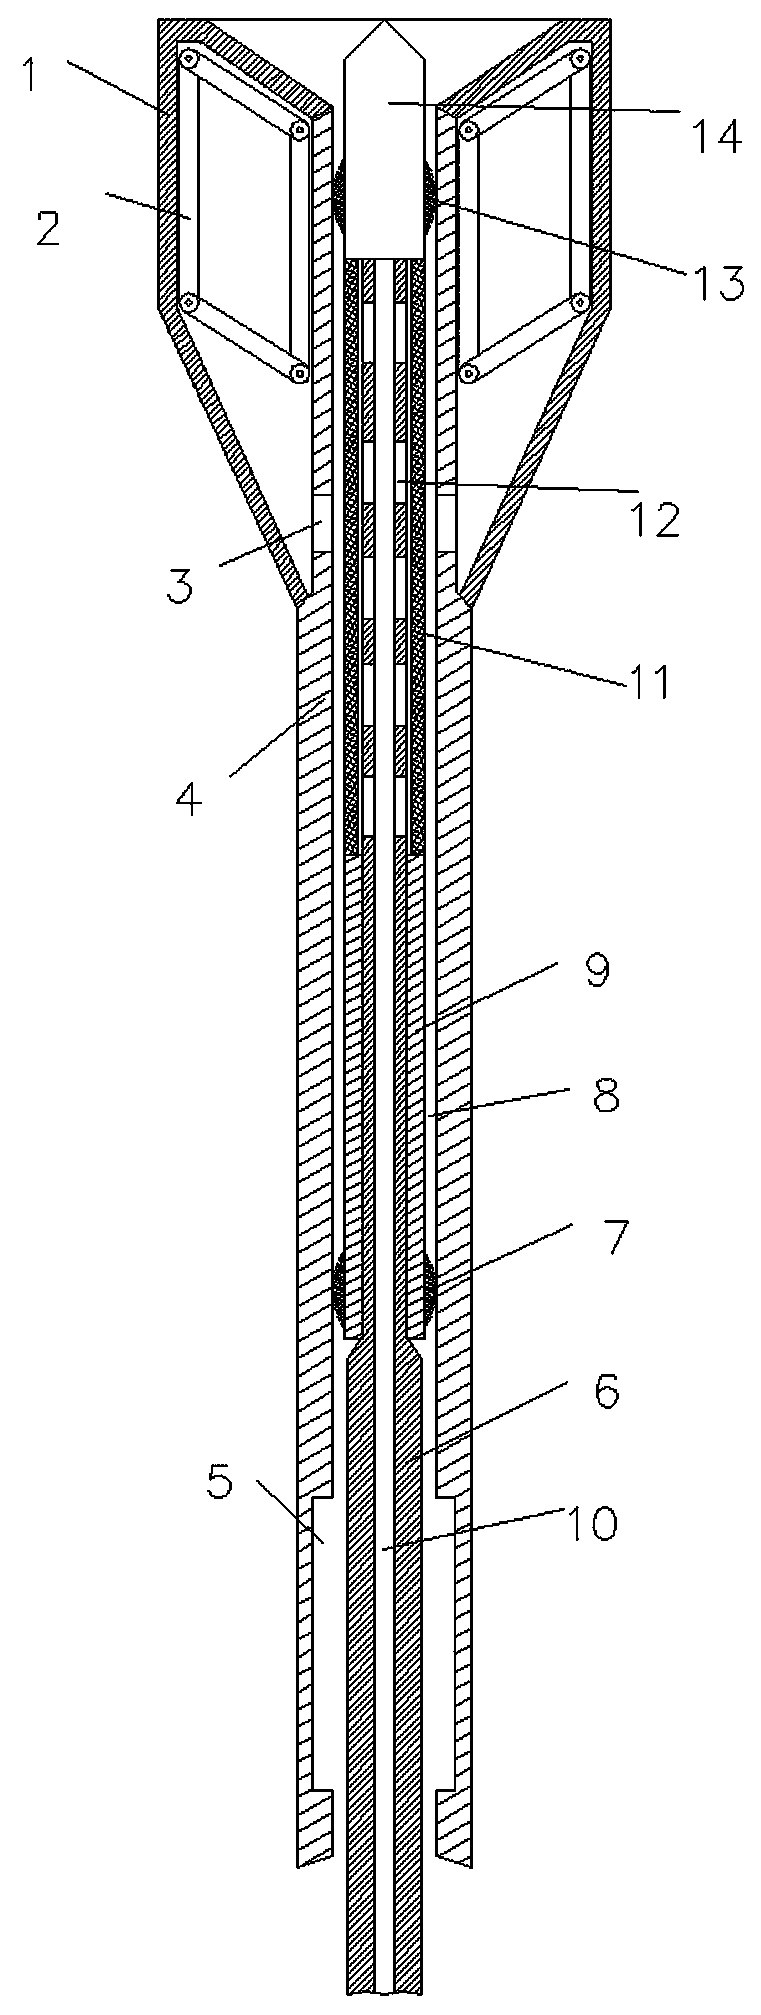 Thrombus-removaldredging device for medical surgery